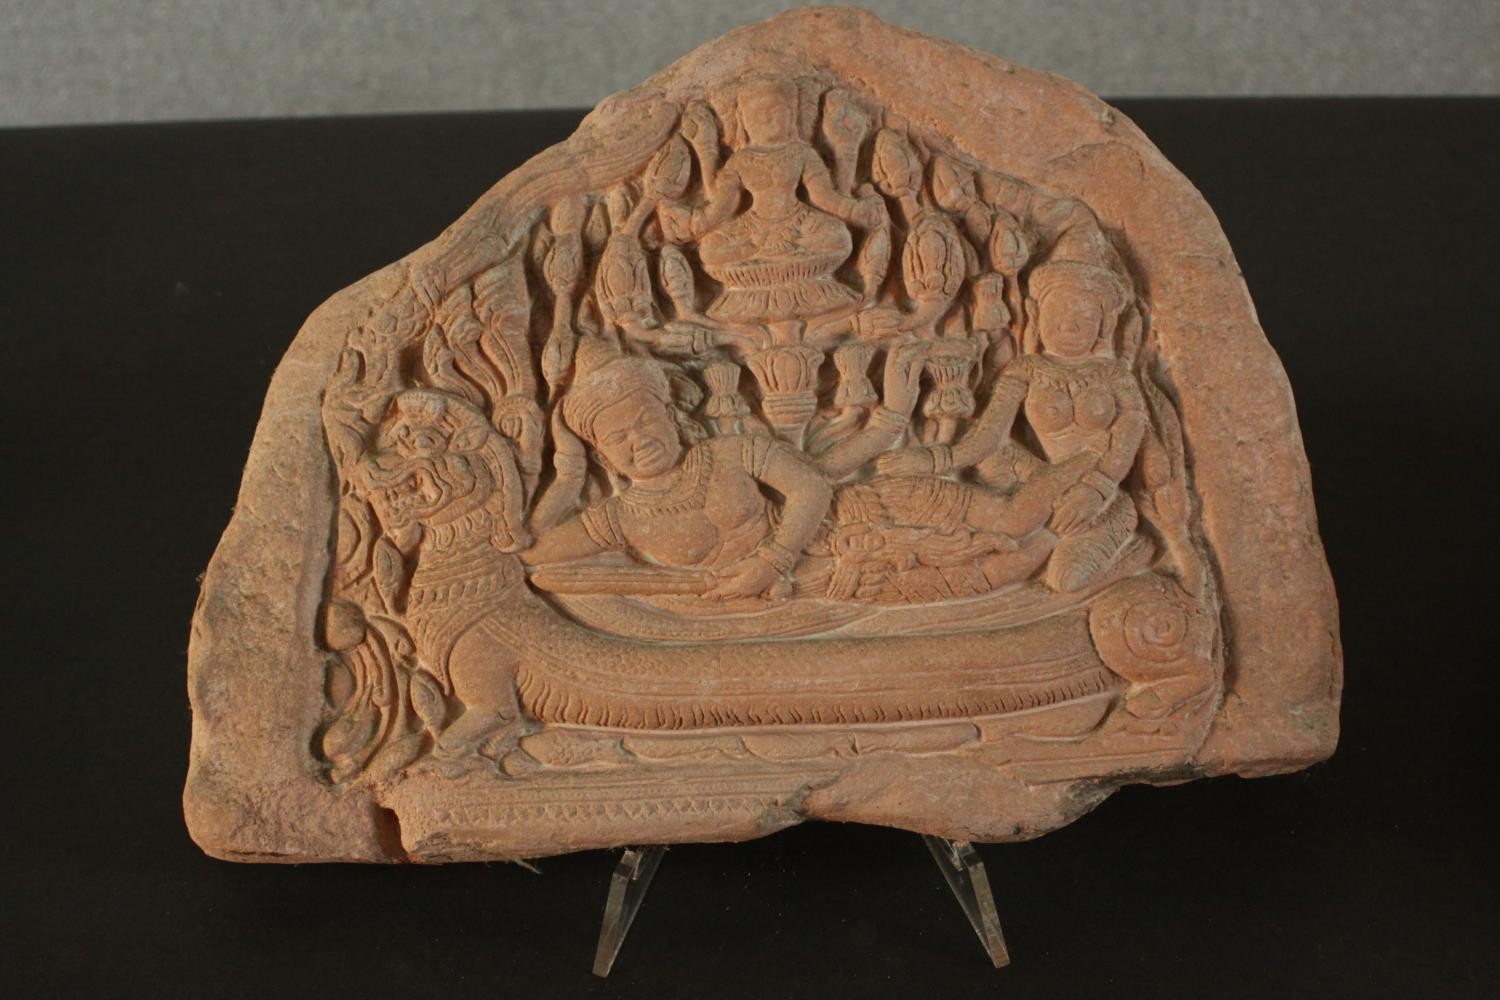 A relief clay tablet depicting Indian deities along with a ceramic vase with incised geometric - Image 3 of 9